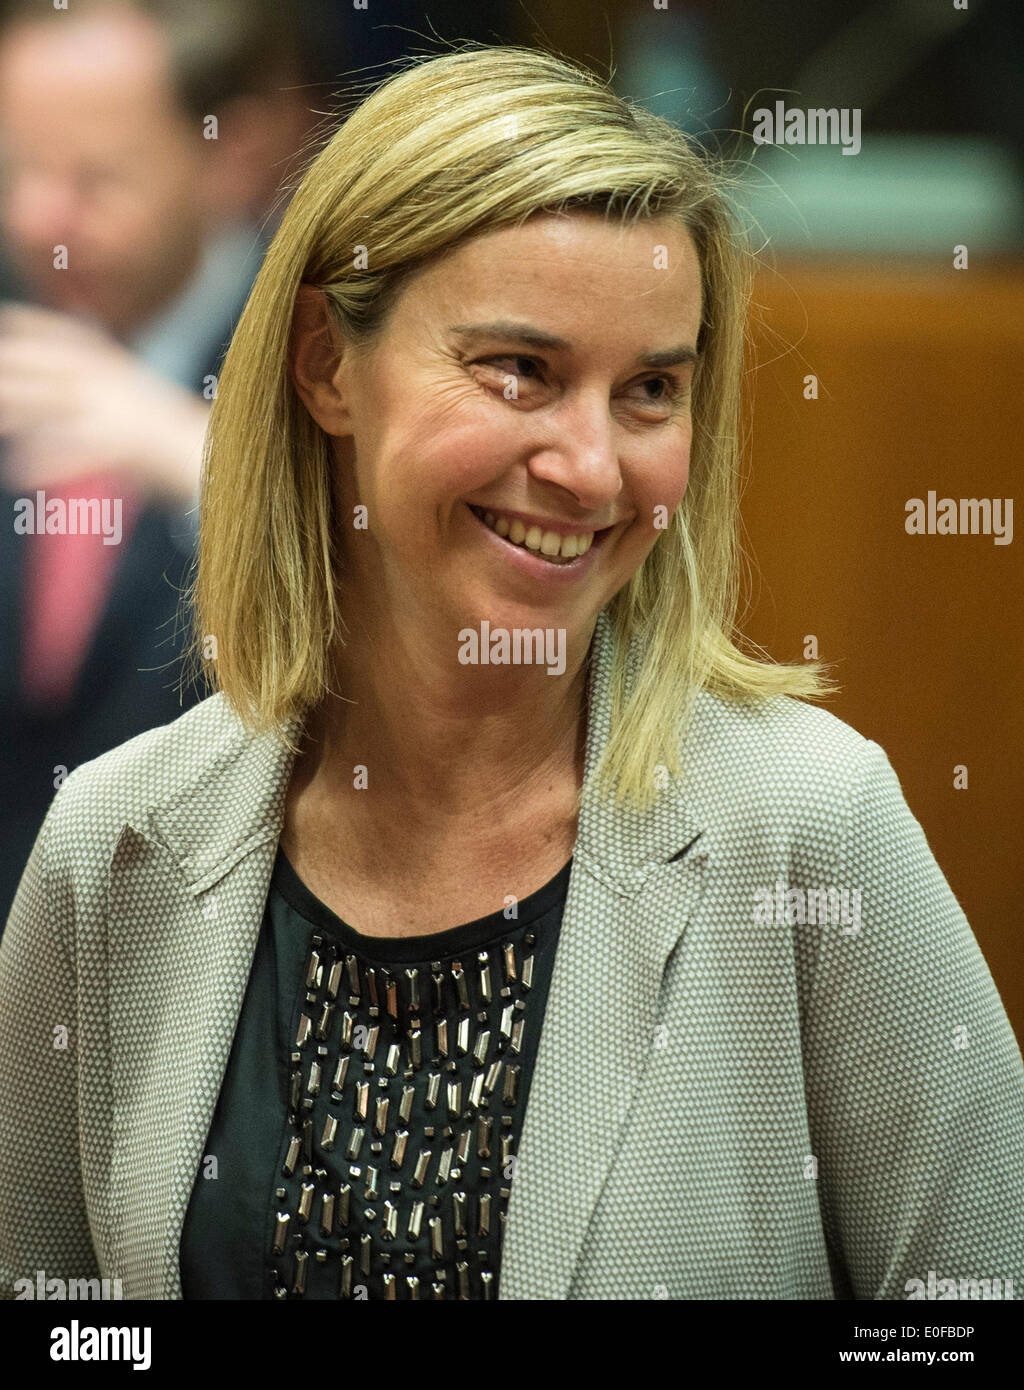 Brussels, Belgium. 12th May, 2014. Italian foreign affairs minister Federica Mogherini at the start of European Foreign affairs council at the EU headquarters in Brussels, Belgium on 12.05.2014 European ministers will make final preparations for the launch of a new European Institute of Peace. Credit:  Wiktor Dabkowski/ZUMAPRESS.com/Alamy Live News Stock Photo